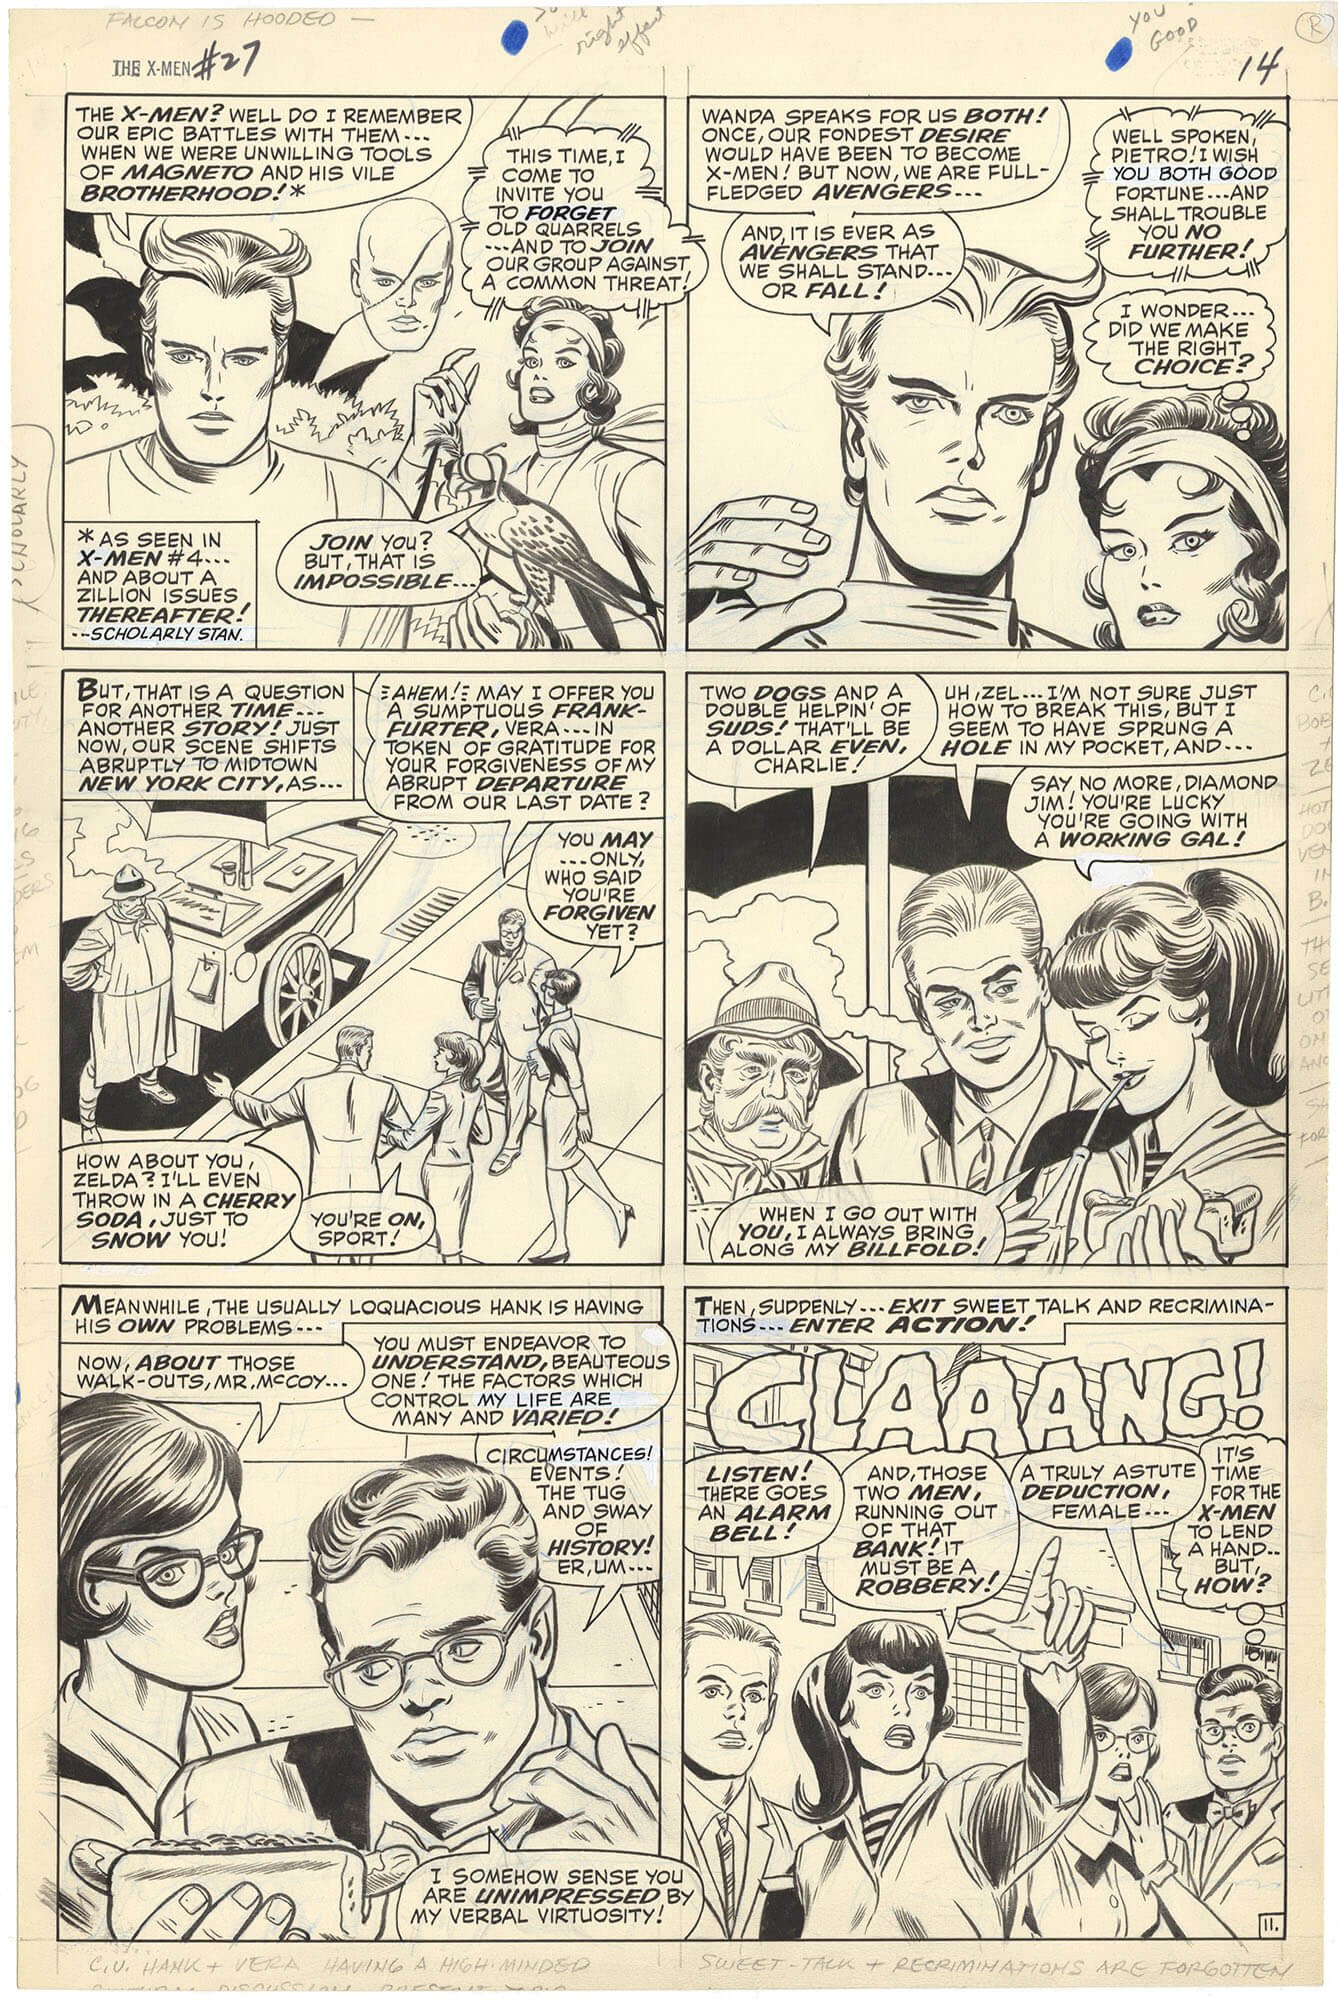 X-Men #27 p11 (Scarlet Witch and Quicksilver asked to join)